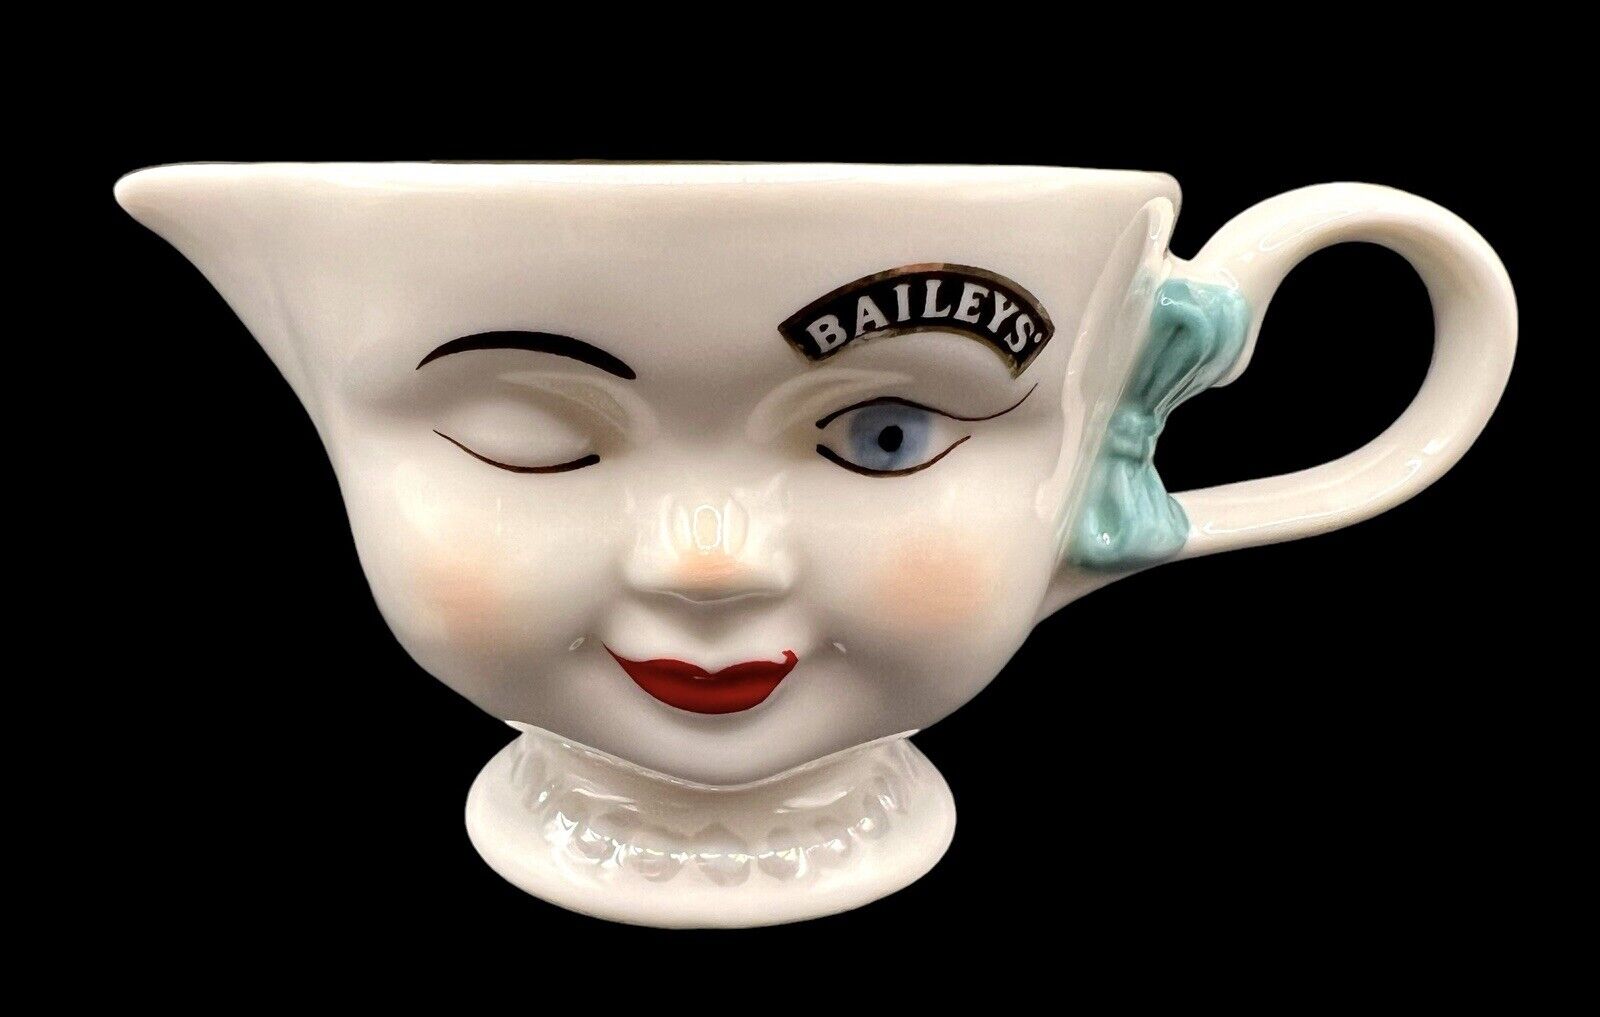 Vintage Baileys Liquor Winking Face Creamer Limited Edition 1996 Yum Pearls Bow